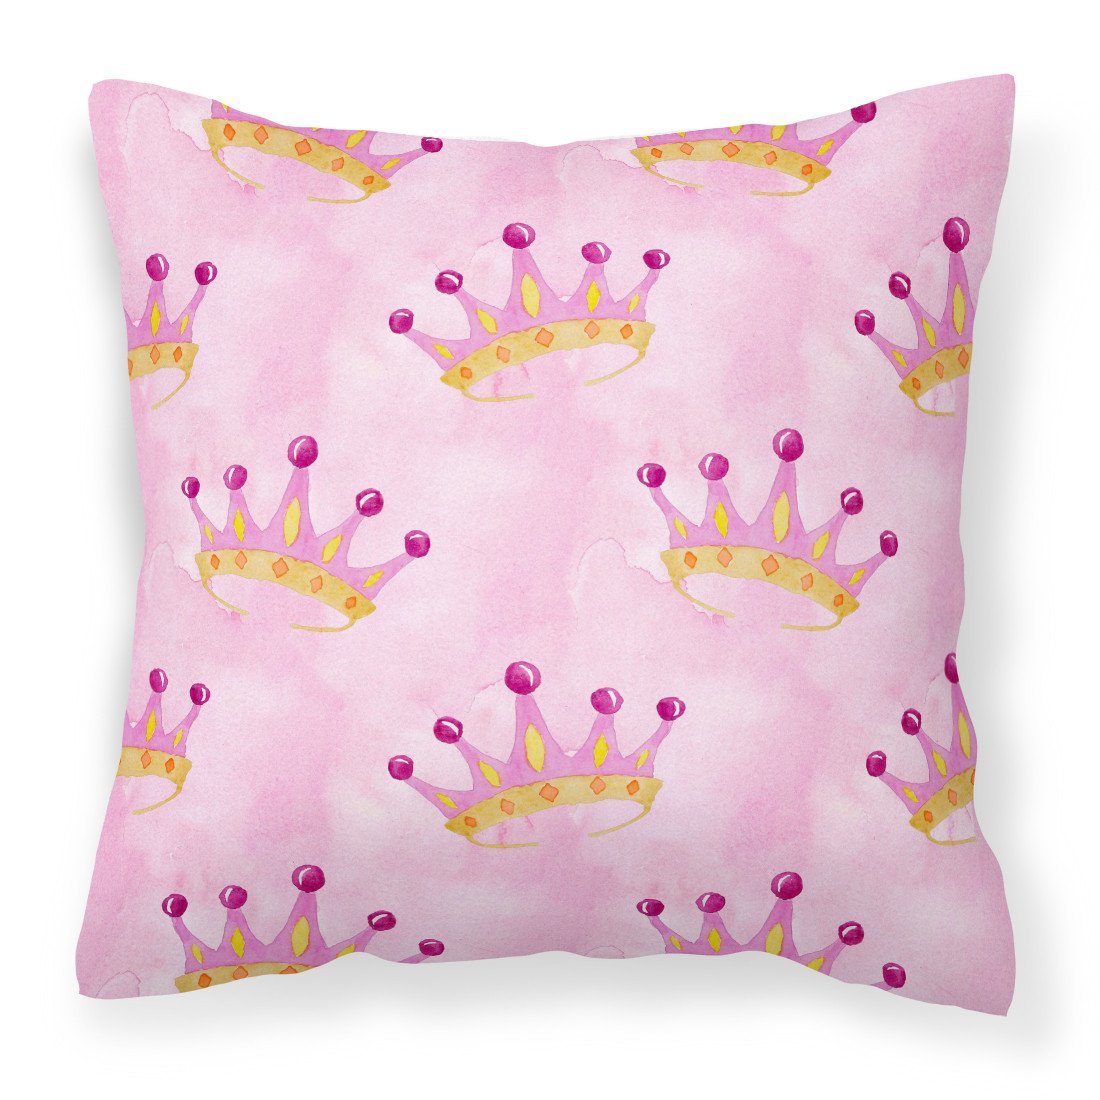 Watercolor Princess Crown on Pink Fabric Decorative Pillow BB7546PW1818 by Caroline's Treasures